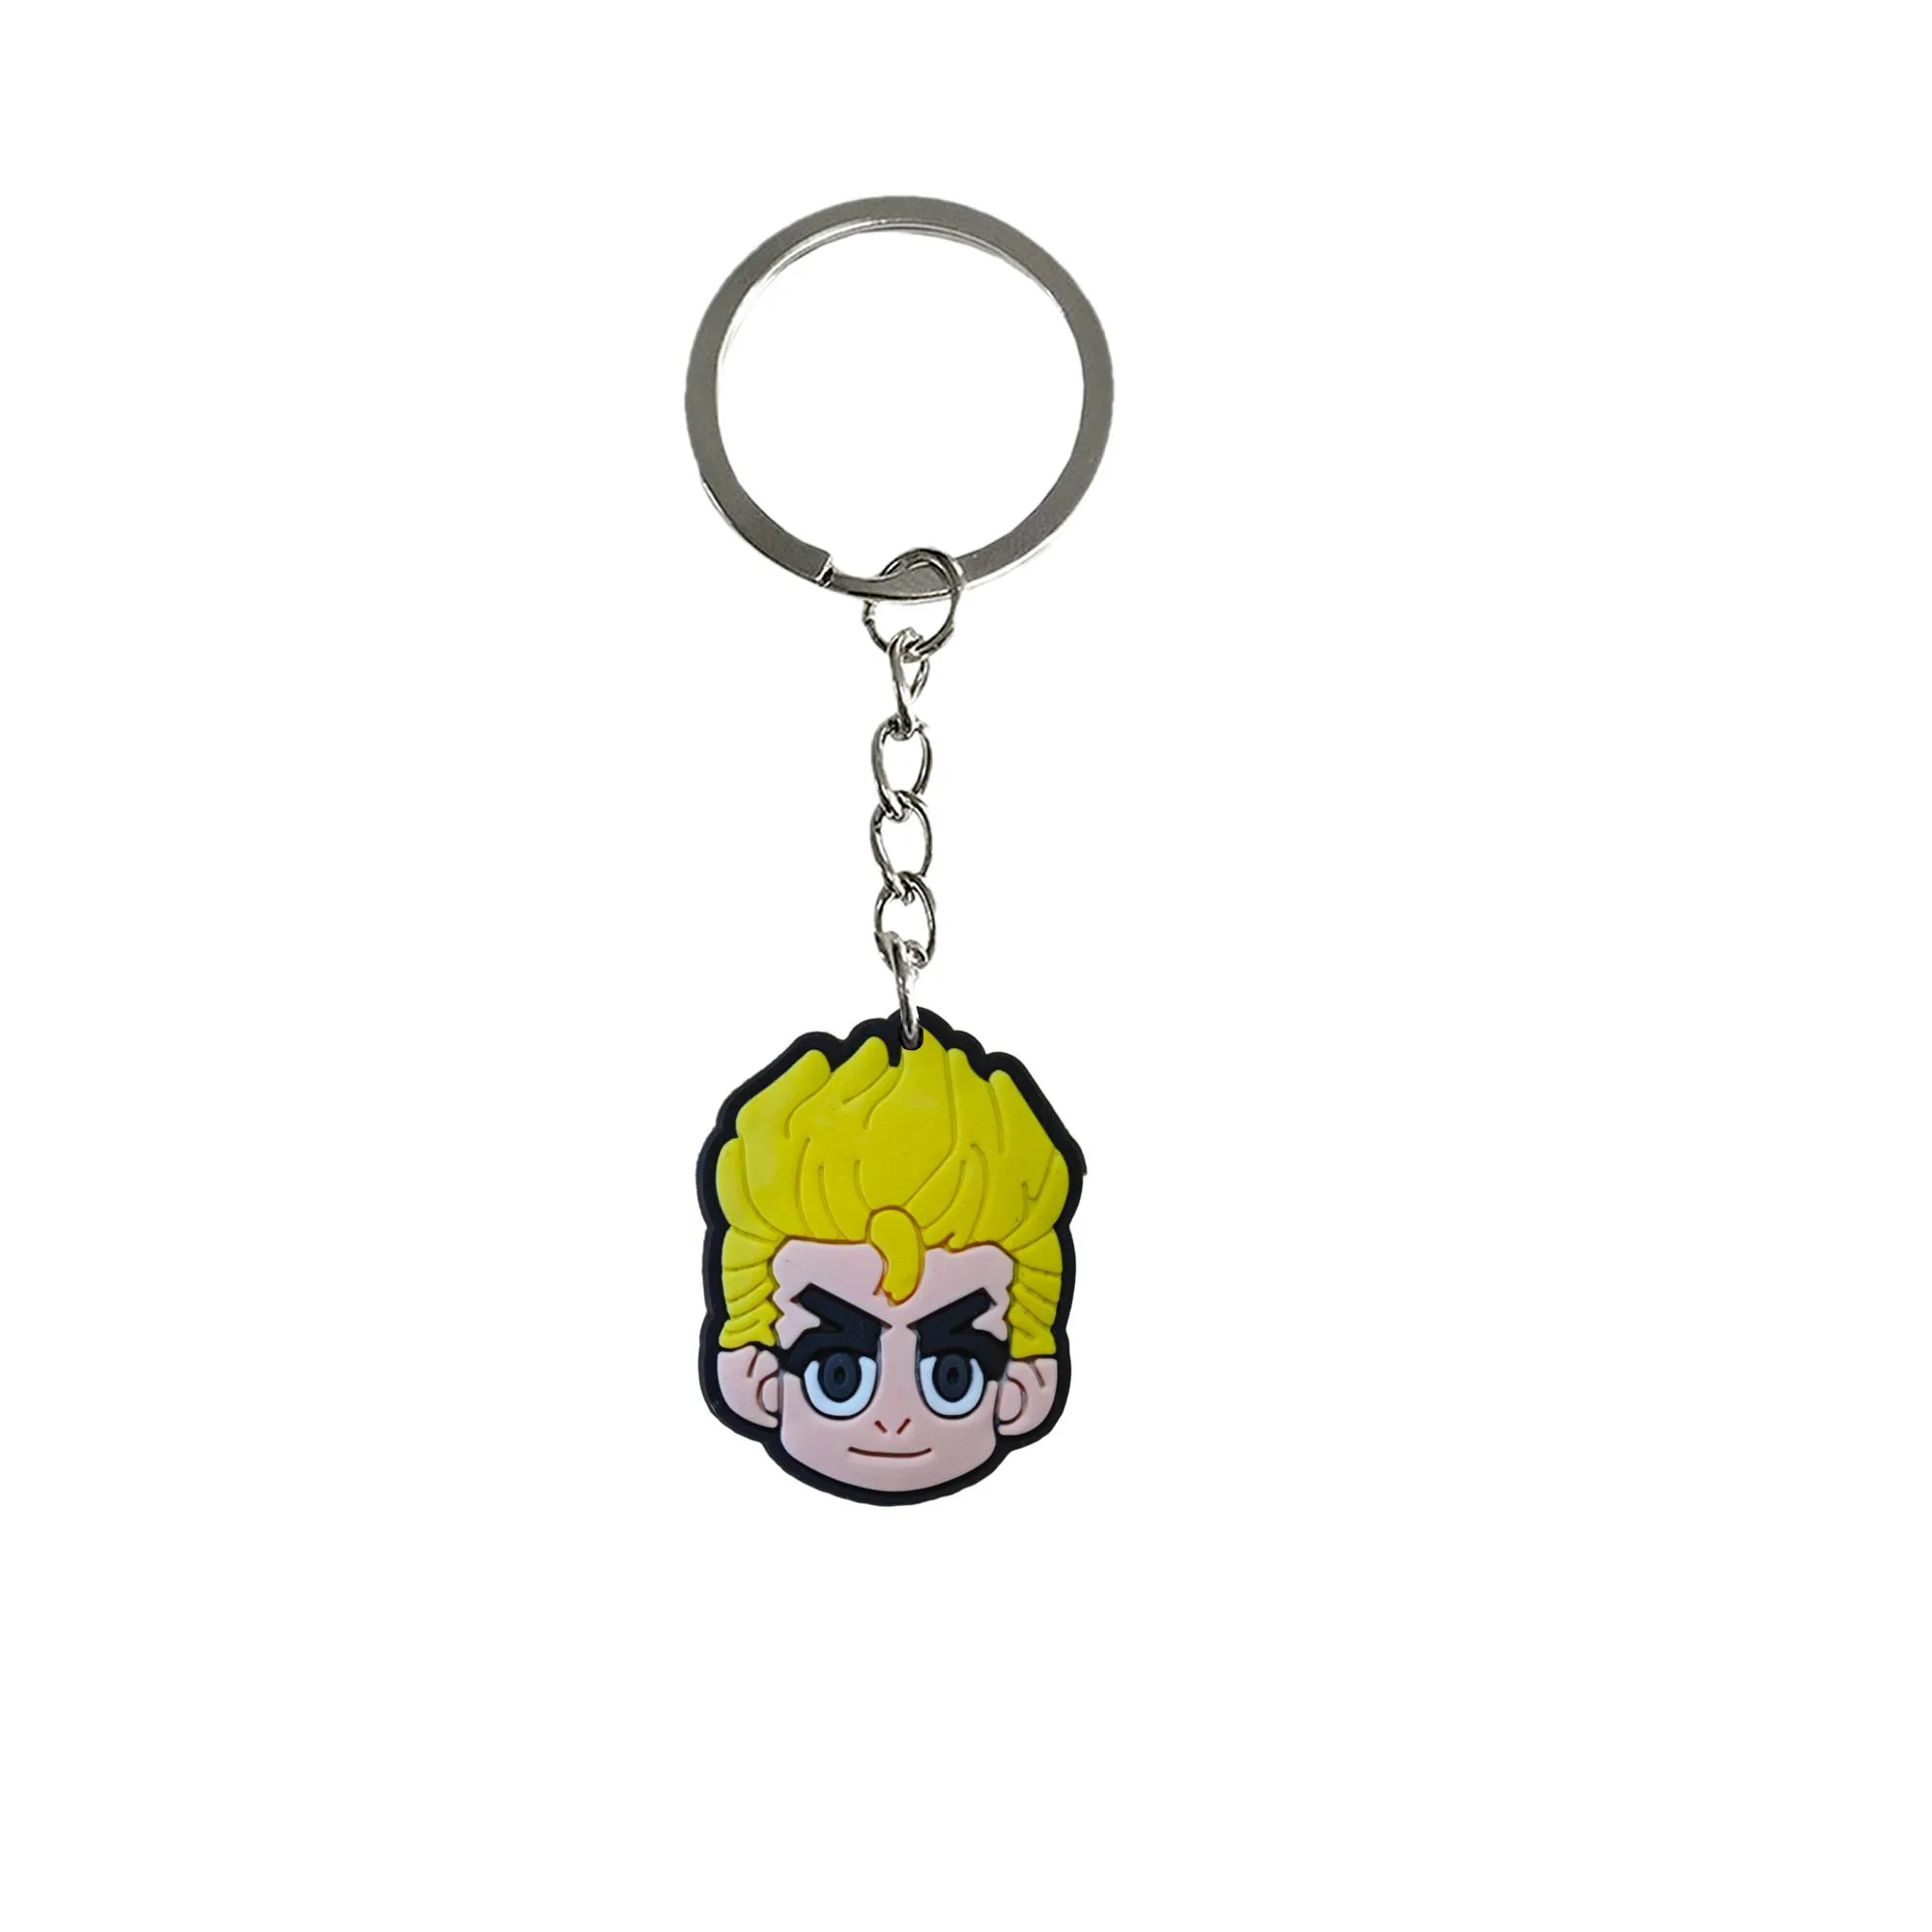 cartoon head keychain for kids party favors tags goodie bag stuffer christmas gifts key ring boys keyring suitable schoolbag keychains and holiday charms anime cool backpacks